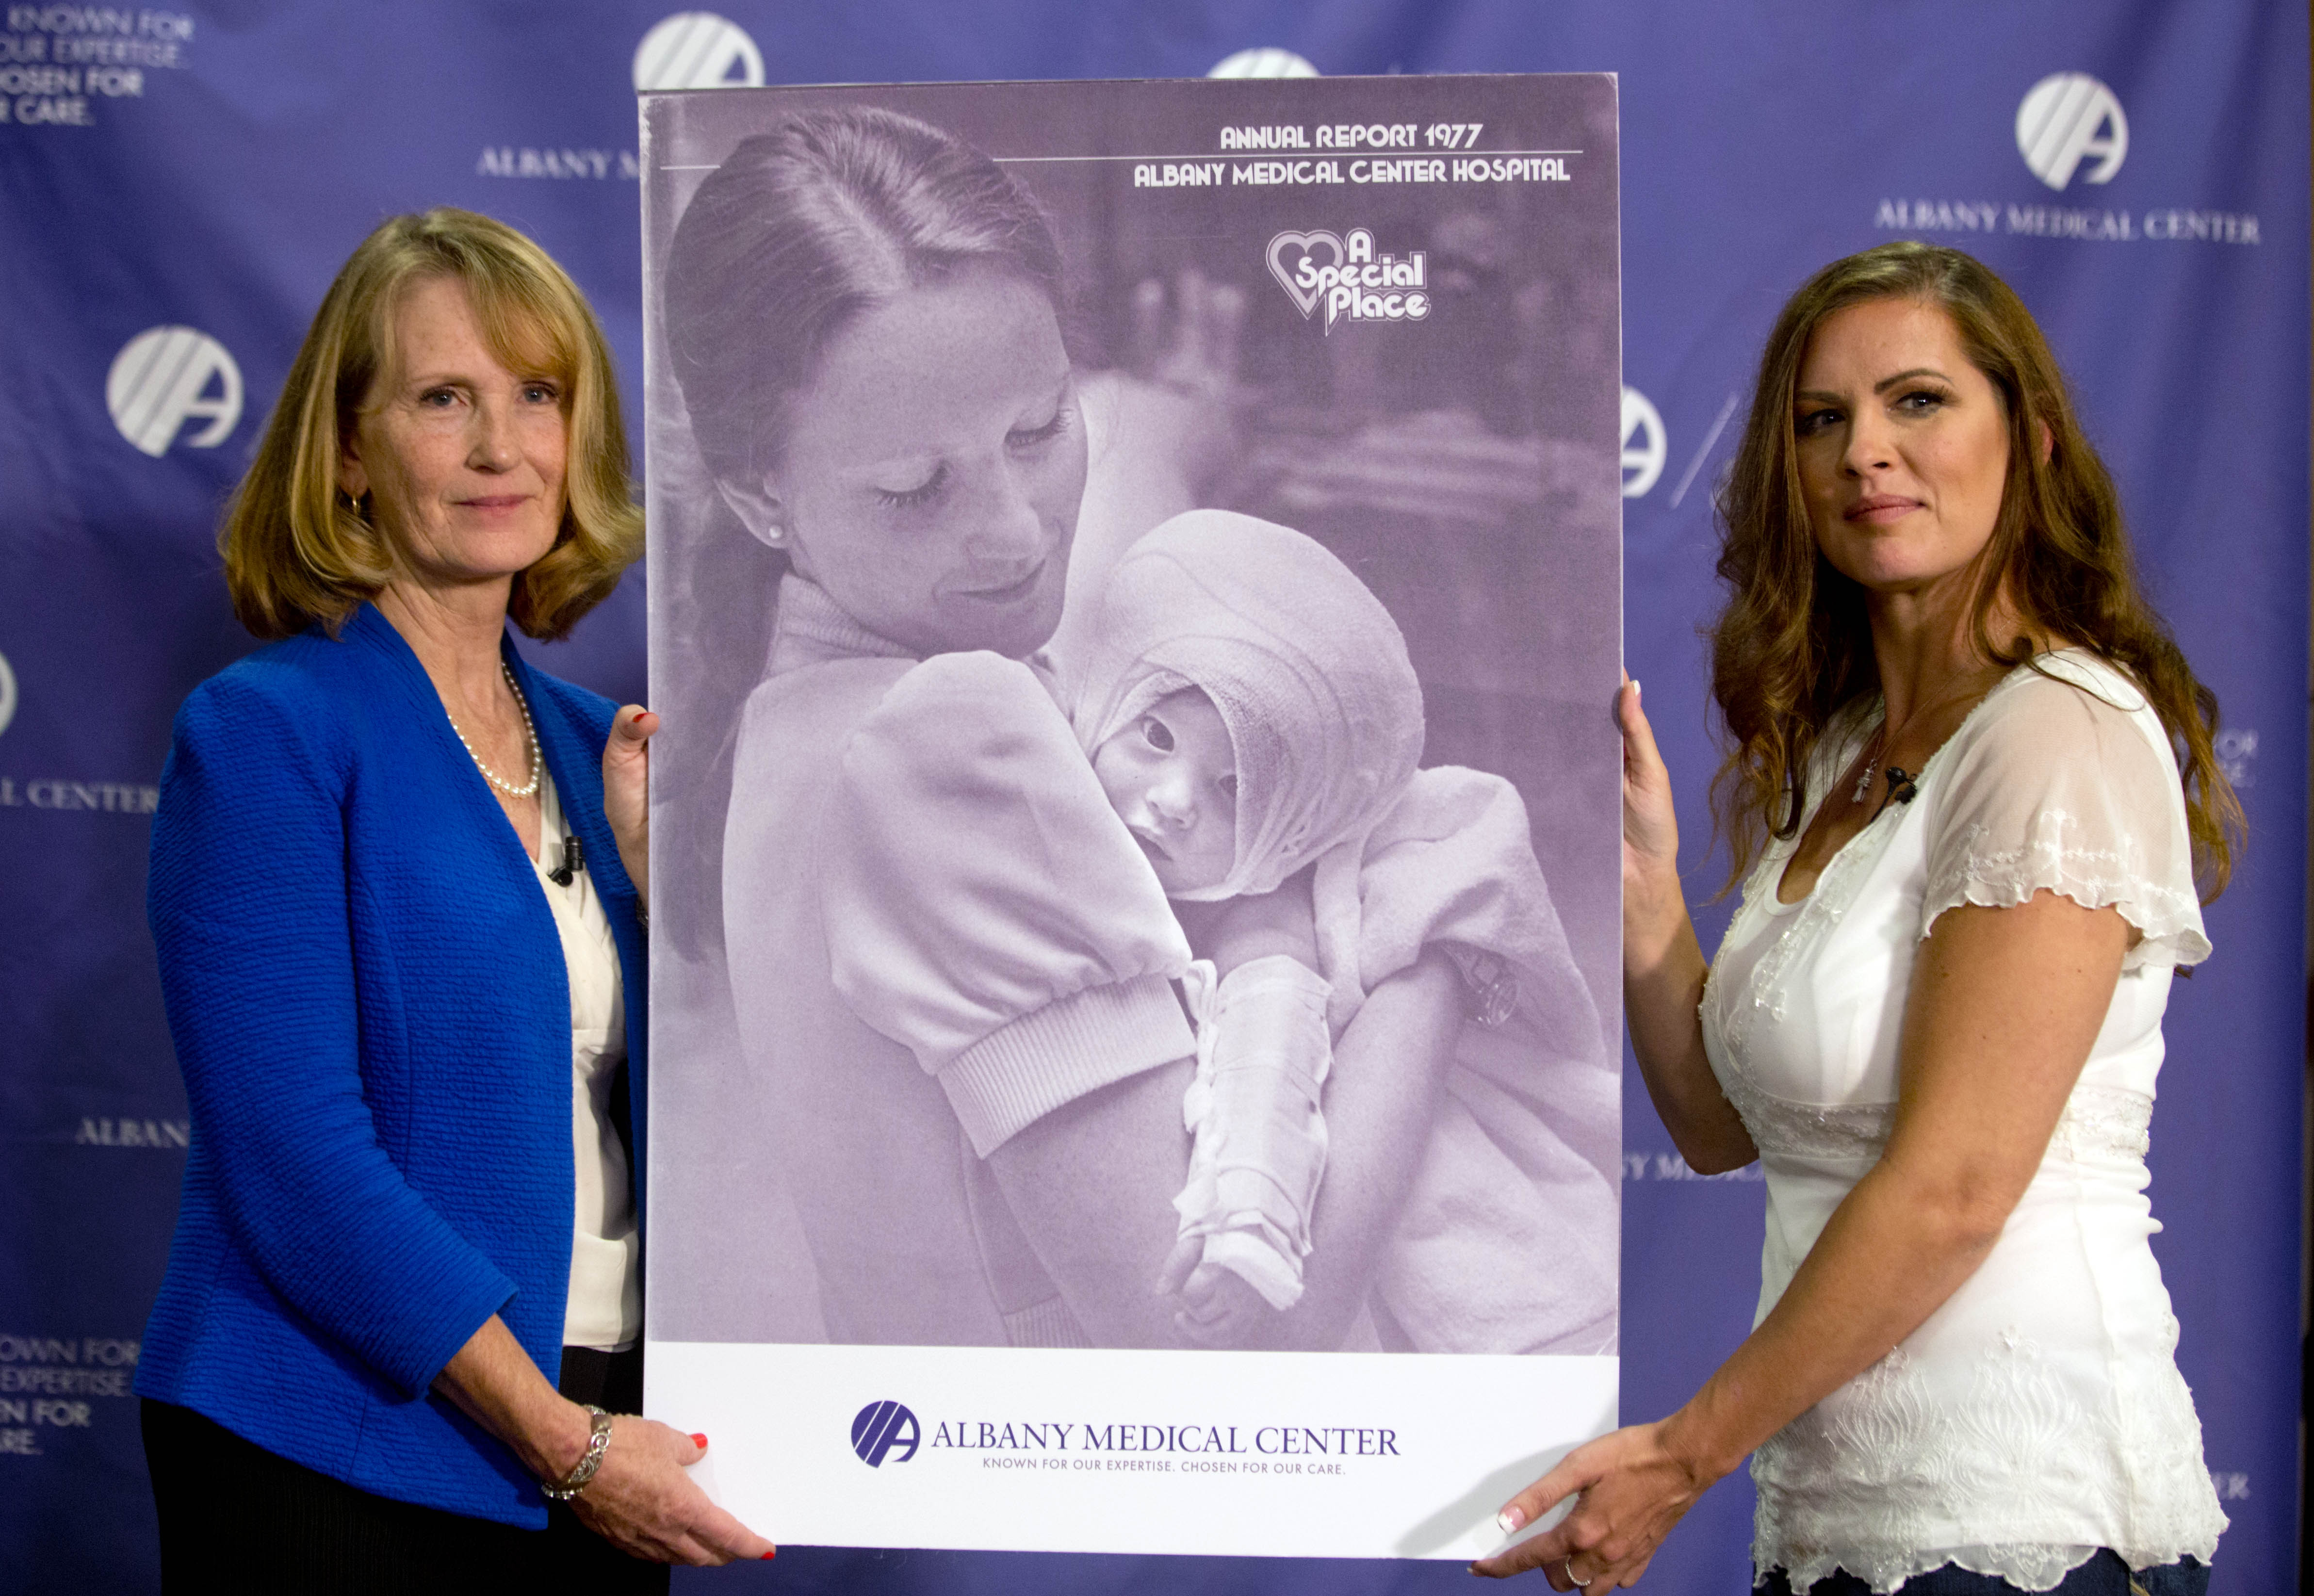 Nurse Susan Berger, left, and Amanda Scarpinati pose with a copy of a 1977 Albany Medical Center annual report during a news conference at Albany Medical Center, Tuesday, Sept. 29, 2015, in Albany, N.Y. Scarpinati, who suffered severe burns as an infant, is finally getting the chance to thank Berger who cared for her, thanks to a social media posting that revealed the identity of the nurse in 38-year-old photos. (AP Photo/Mike Groll)